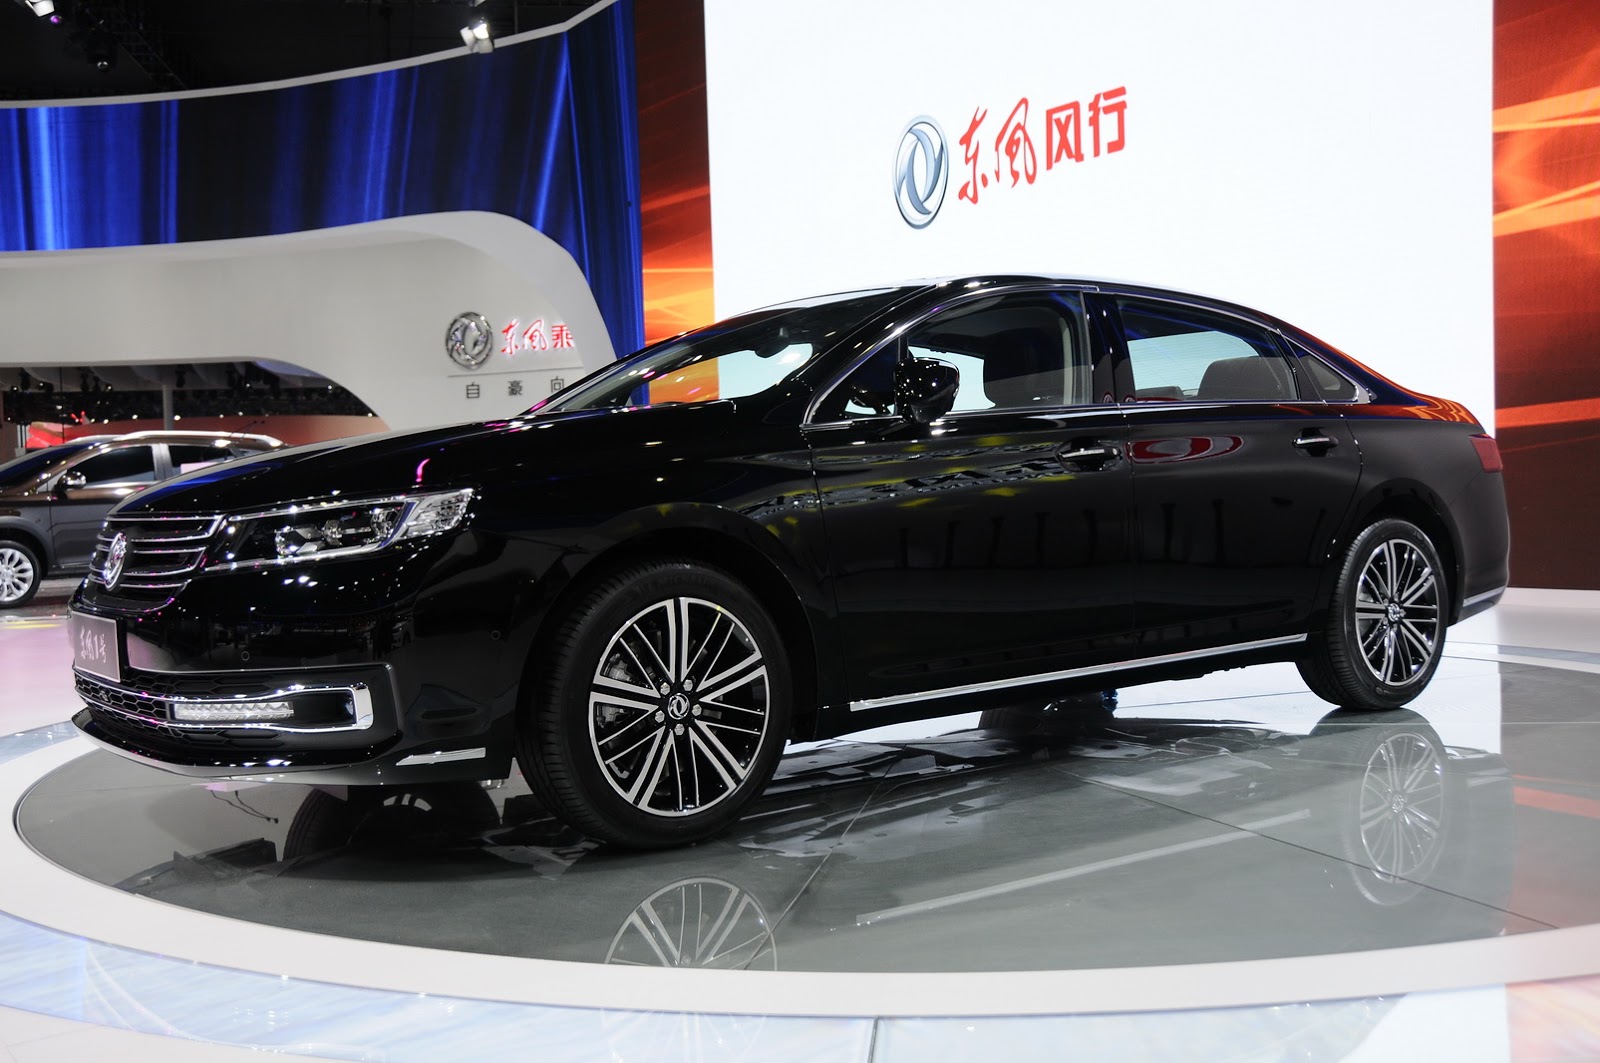 New Dongfeng Number 1 Has French Roots | Carscoops